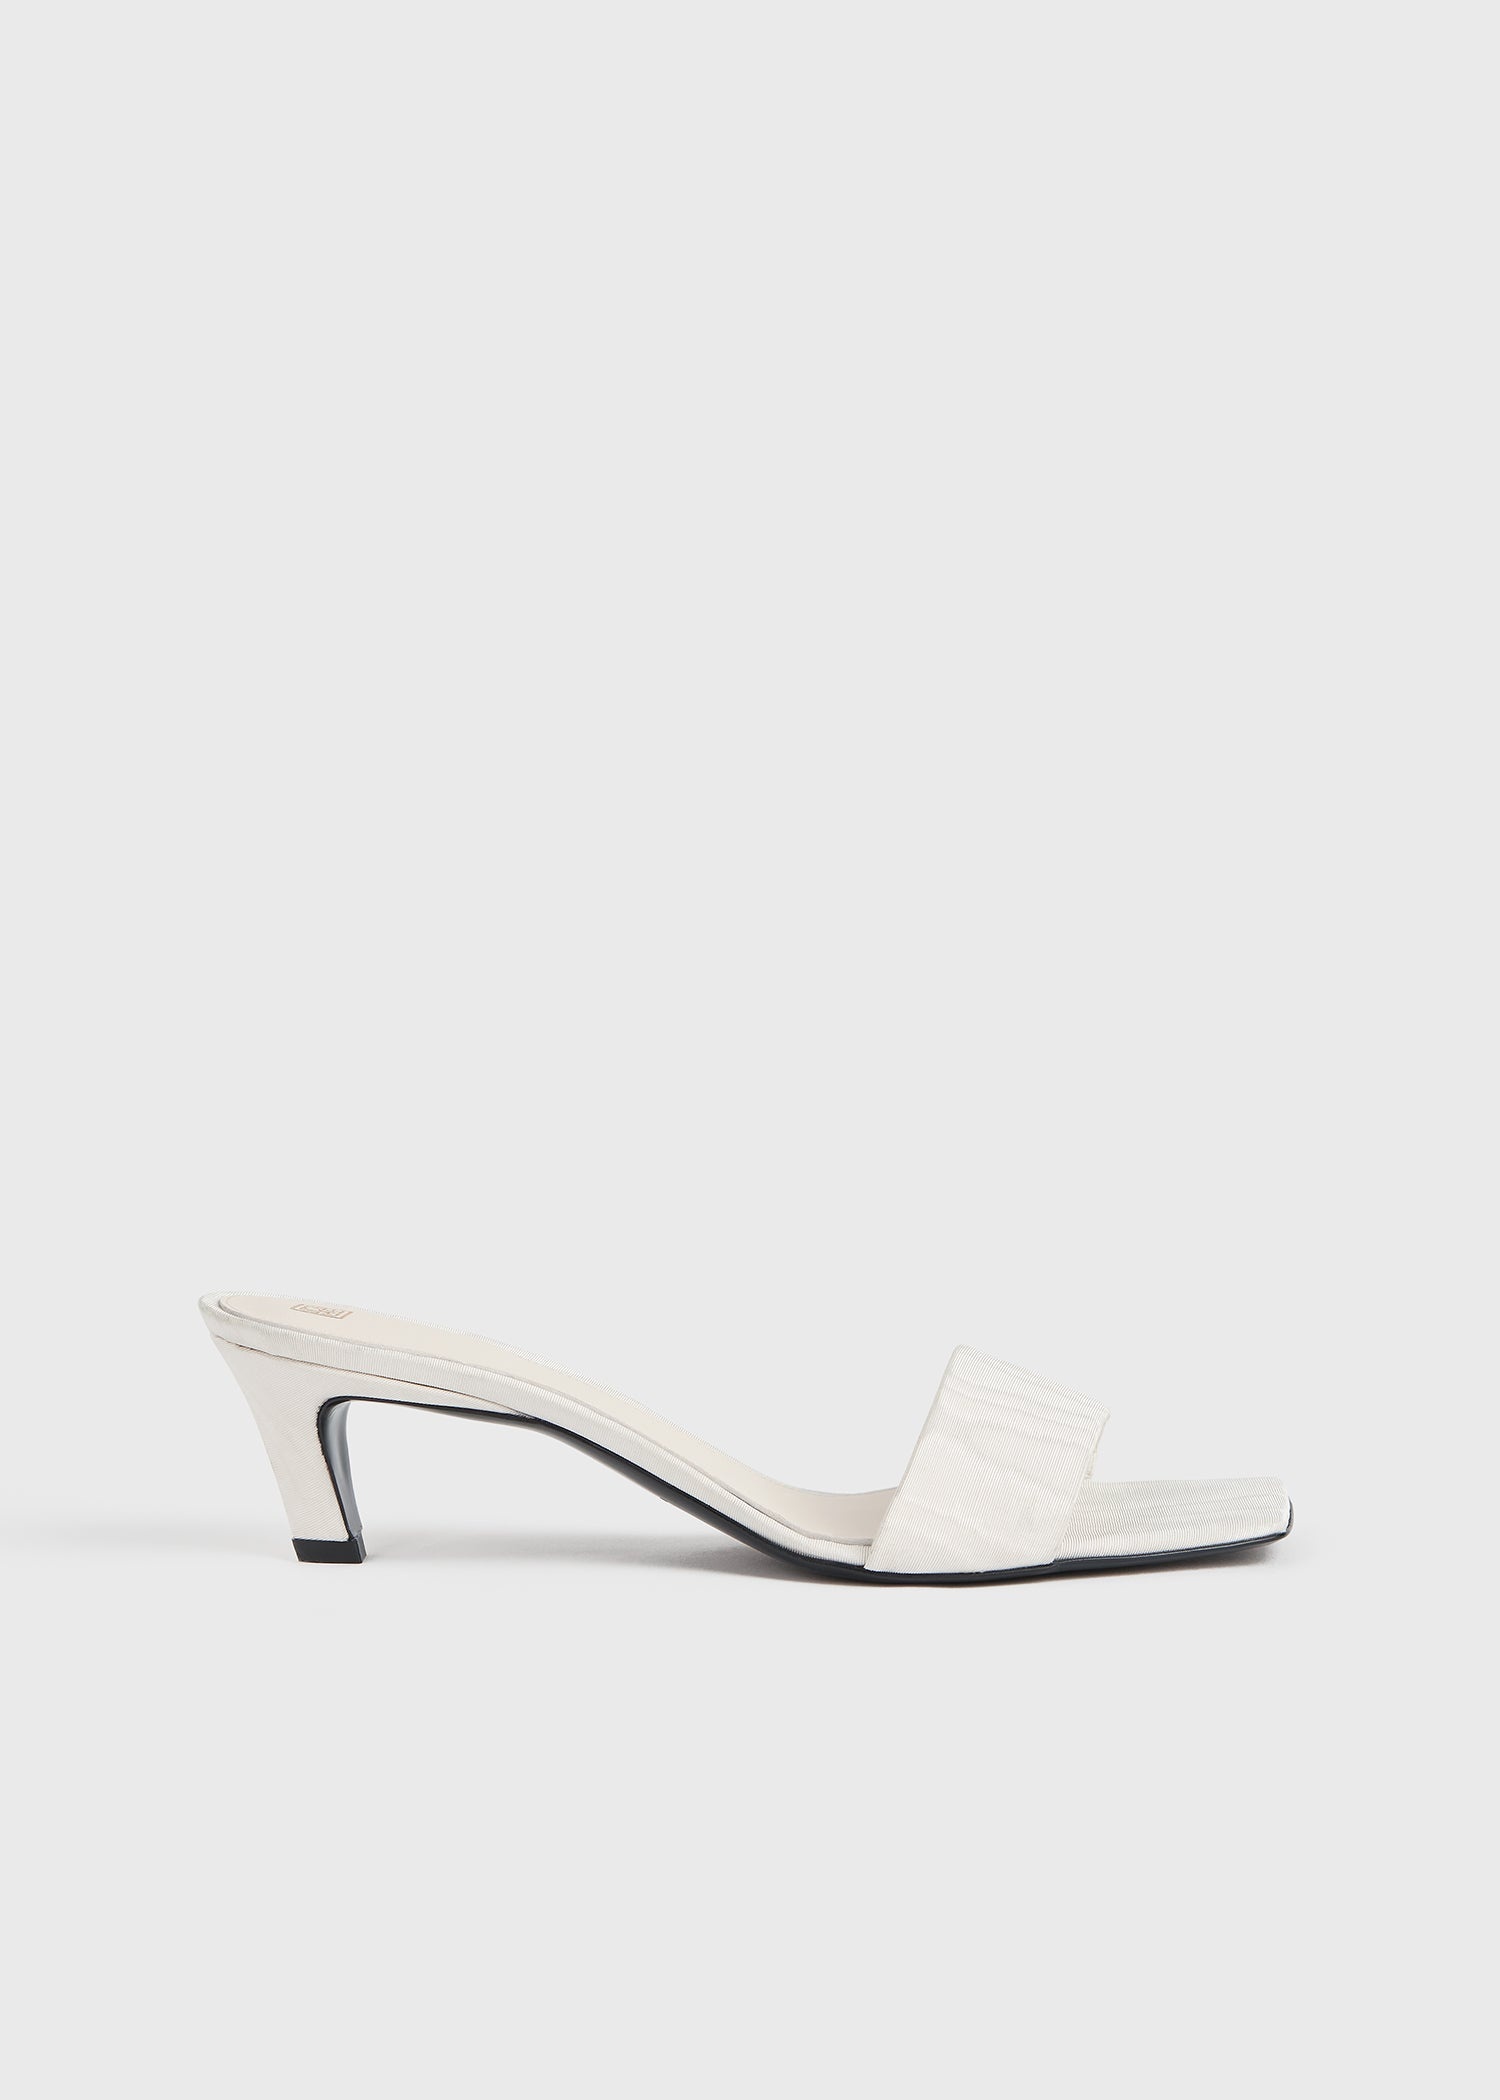 The Mule Sandal off-white - 8